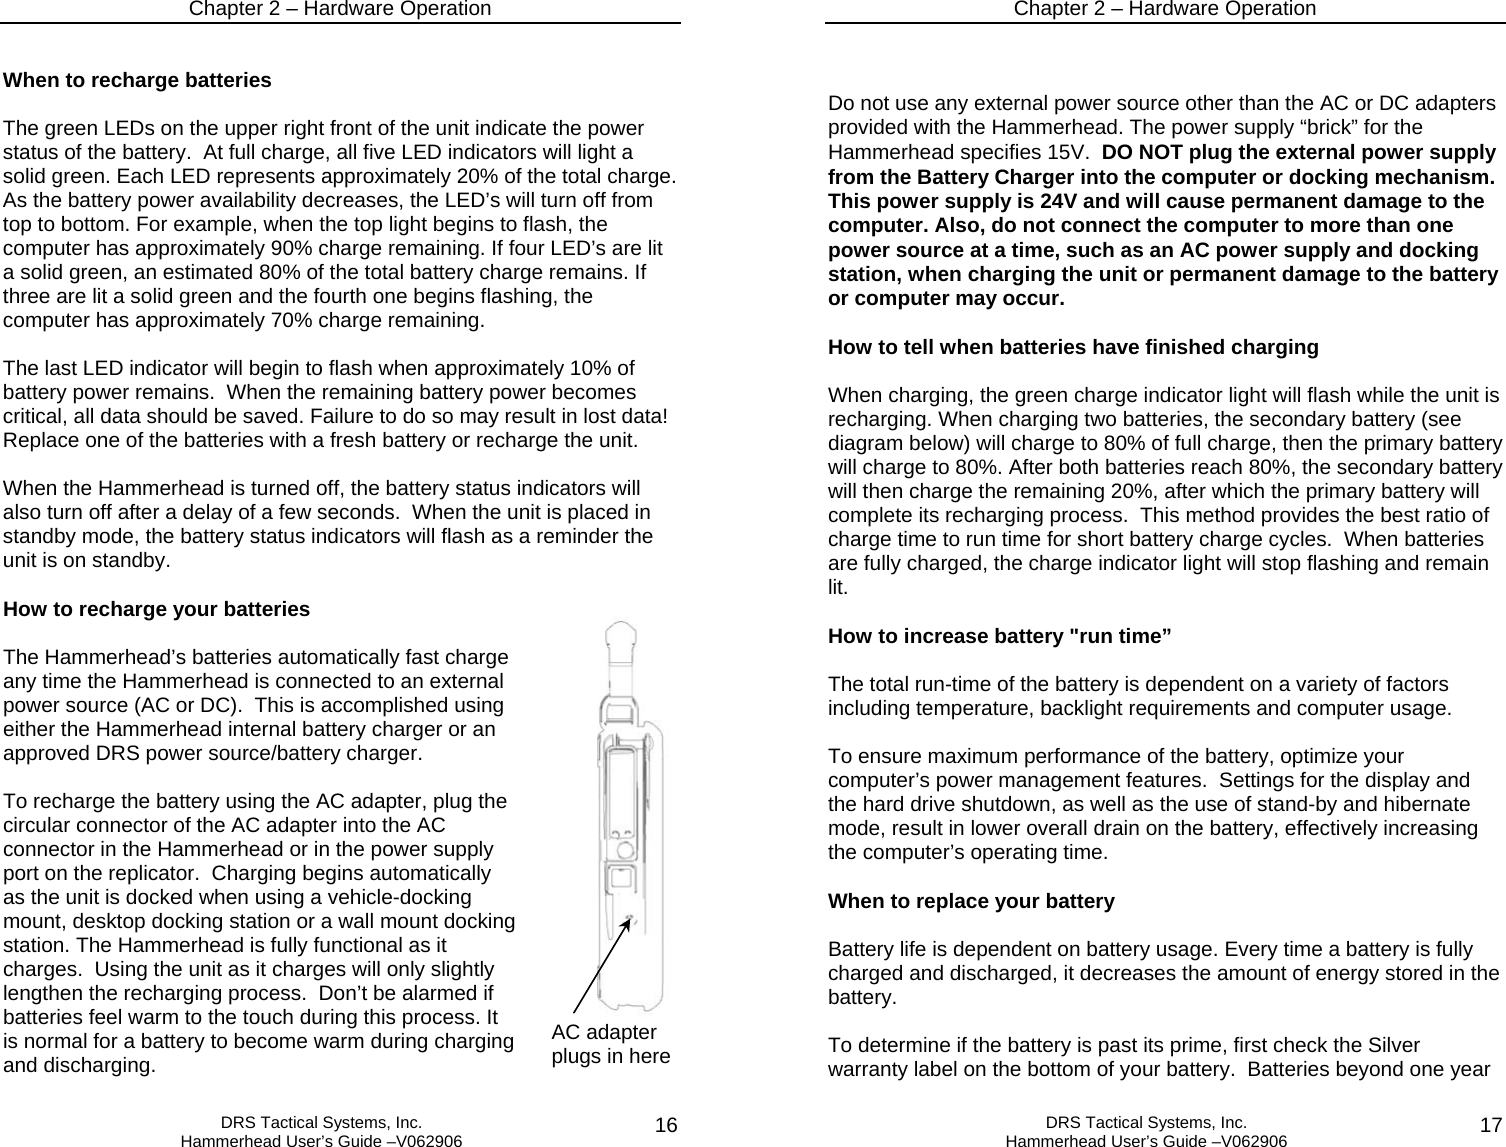 Chapter 2 – Hardware Operation   DRS Tactical Systems, Inc.  Hammerhead User’s Guide –V062906  16When to recharge batteries  The green LEDs on the upper right front of the unit indicate the power status of the battery.  At full charge, all five LED indicators will light a solid green. Each LED represents approximately 20% of the total charge. As the battery power availability decreases, the LED’s will turn off from top to bottom. For example, when the top light begins to flash, the computer has approximately 90% charge remaining. If four LED’s are lit a solid green, an estimated 80% of the total battery charge remains. If three are lit a solid green and the fourth one begins flashing, the computer has approximately 70% charge remaining.   The last LED indicator will begin to flash when approximately 10% of battery power remains.  When the remaining battery power becomes critical, all data should be saved. Failure to do so may result in lost data!  Replace one of the batteries with a fresh battery or recharge the unit.  When the Hammerhead is turned off, the battery status indicators will also turn off after a delay of a few seconds.  When the unit is placed in standby mode, the battery status indicators will flash as a reminder the unit is on standby.  How to recharge your batteries  The Hammerhead’s batteries automatically fast charge any time the Hammerhead is connected to an external power source (AC or DC).  This is accomplished using either the Hammerhead internal battery charger or an approved DRS power source/battery charger.  To recharge the battery using the AC adapter, plug the circular connector of the AC adapter into the AC connector in the Hammerhead or in the power supply port on the replicator.  Charging begins automatically as the unit is docked when using a vehicle-docking mount, desktop docking station or a wall mount docking station. The Hammerhead is fully functional as it charges.  Using the unit as it charges will only slightly lengthen the recharging process.  Don’t be alarmed if batteries feel warm to the touch during this process. It is normal for a battery to become warm during charging and discharging. AC adapter plugs in here Chapter 2 – Hardware Operation   DRS Tactical Systems, Inc.  Hammerhead User’s Guide –V062906  17  Do not use any external power source other than the AC or DC adapters provided with the Hammerhead. The power supply “brick” for the Hammerhead specifies 15V.  DO NOT plug the external power supply from the Battery Charger into the computer or docking mechanism. This power supply is 24V and will cause permanent damage to the computer. Also, do not connect the computer to more than one power source at a time, such as an AC power supply and docking station, when charging the unit or permanent damage to the battery or computer may occur.  How to tell when batteries have finished charging  When charging, the green charge indicator light will flash while the unit is recharging. When charging two batteries, the secondary battery (see diagram below) will charge to 80% of full charge, then the primary battery will charge to 80%. After both batteries reach 80%, the secondary battery will then charge the remaining 20%, after which the primary battery will complete its recharging process.  This method provides the best ratio of charge time to run time for short battery charge cycles.  When batteries are fully charged, the charge indicator light will stop flashing and remain lit.  How to increase battery &quot;run time”  The total run-time of the battery is dependent on a variety of factors including temperature, backlight requirements and computer usage.  To ensure maximum performance of the battery, optimize your computer’s power management features.  Settings for the display and the hard drive shutdown, as well as the use of stand-by and hibernate mode, result in lower overall drain on the battery, effectively increasing the computer’s operating time.   When to replace your battery  Battery life is dependent on battery usage. Every time a battery is fully charged and discharged, it decreases the amount of energy stored in the battery.   To determine if the battery is past its prime, first check the Silver warranty label on the bottom of your battery.  Batteries beyond one year 